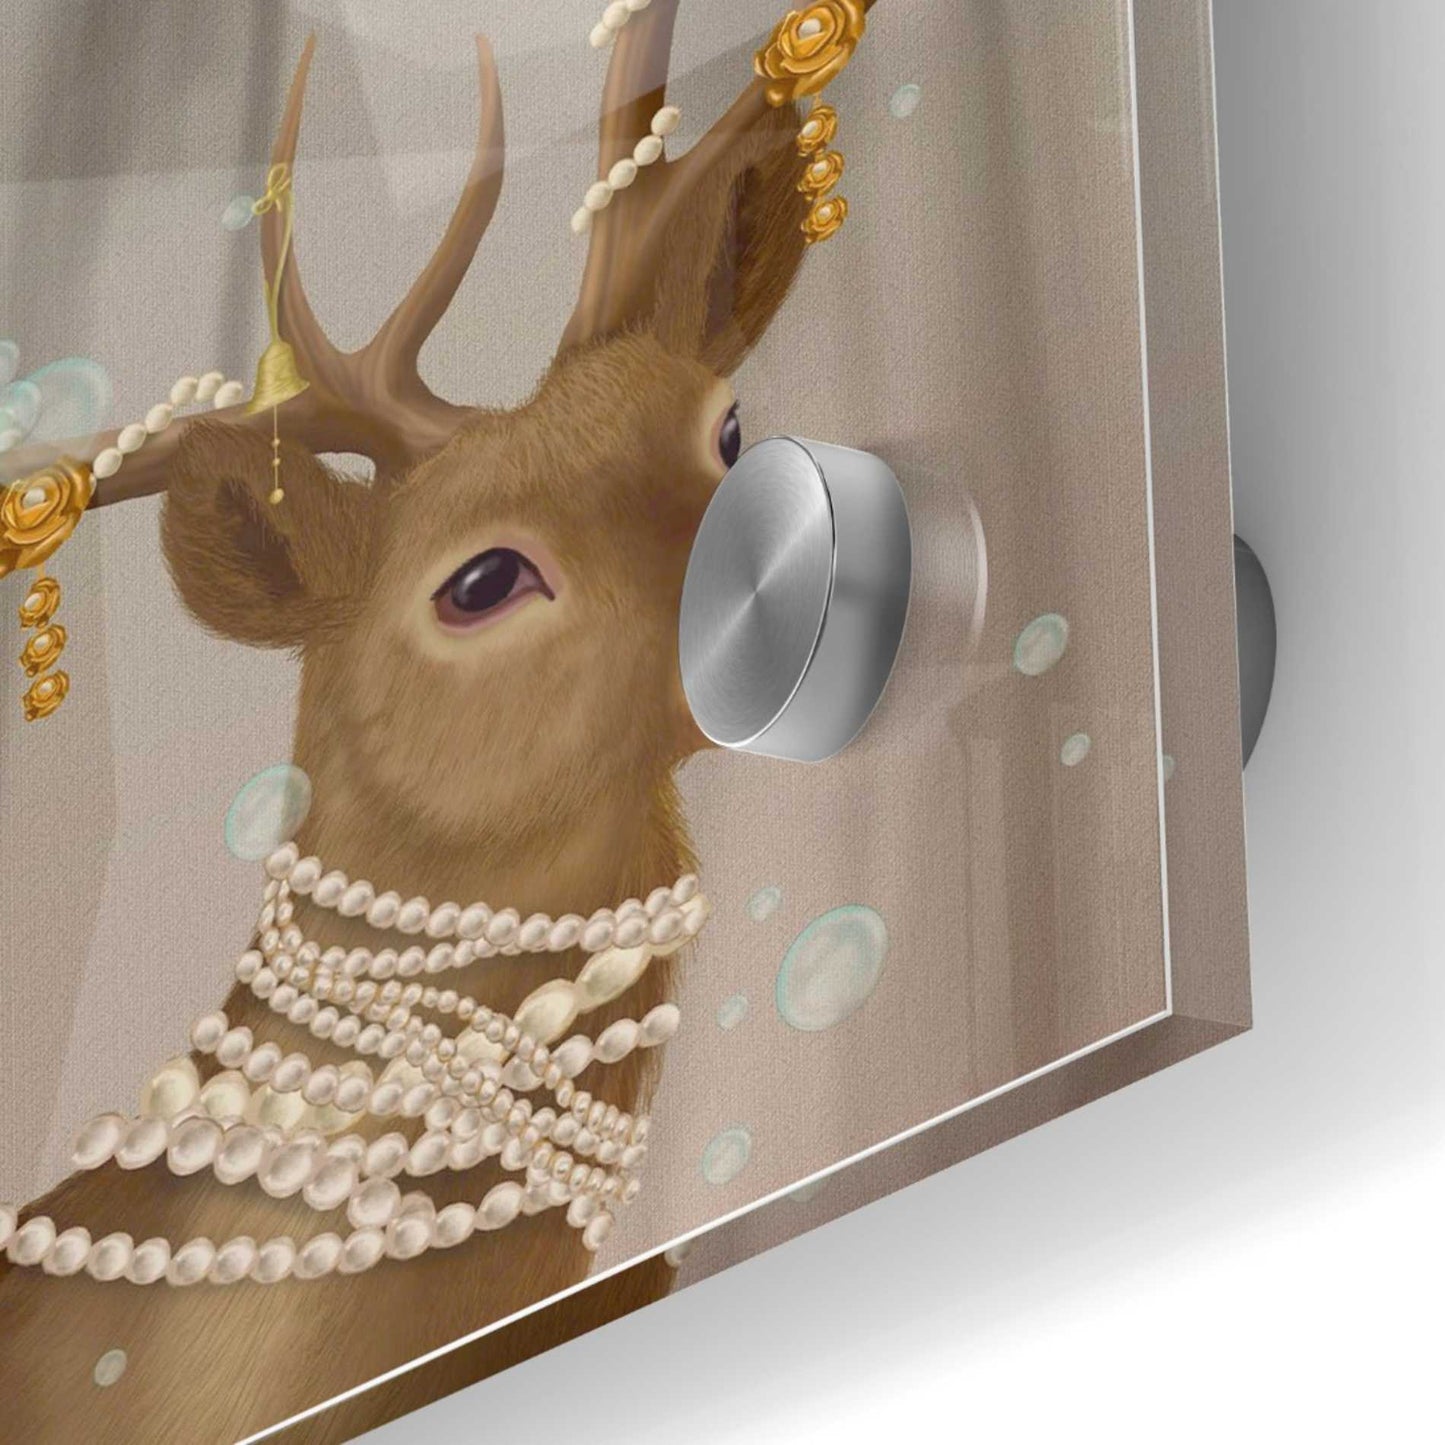 Epic Art 'Deer with Gold Bells' by Fab Funky Acrylic Glass Wall Art,36x36